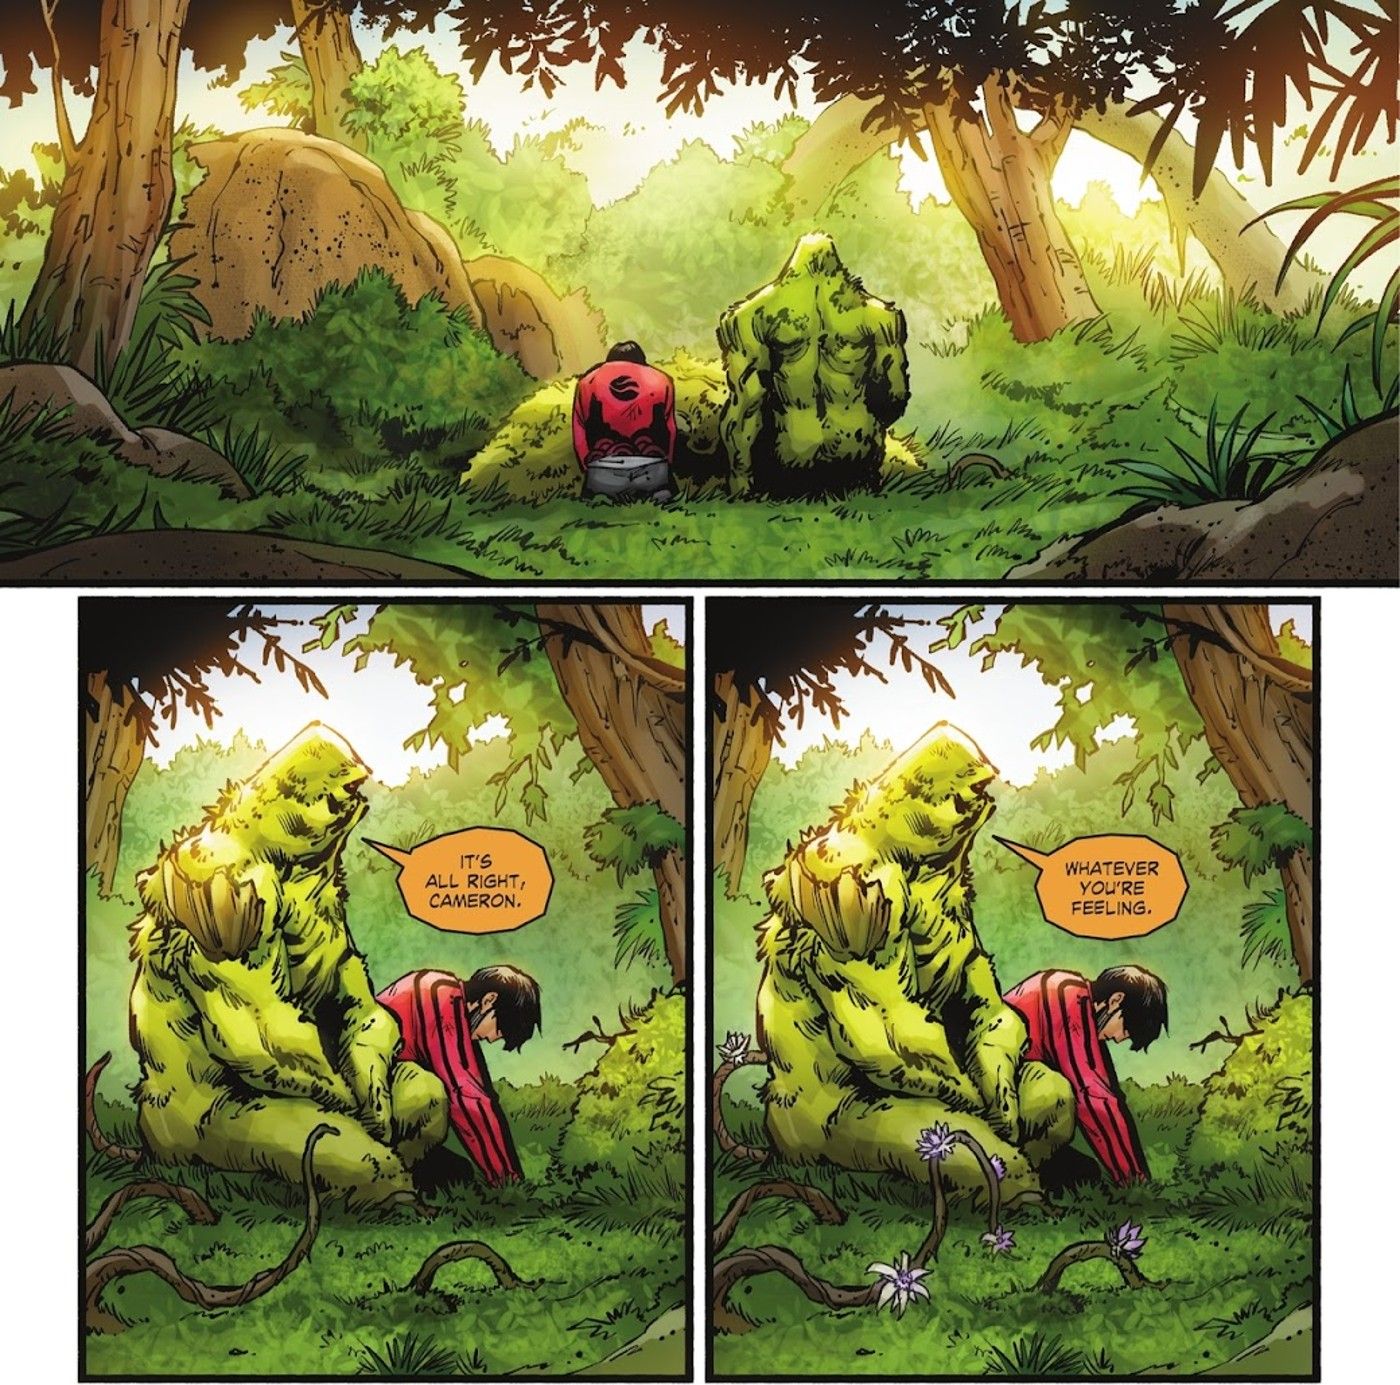 Swamp Thing Comforts City Boy in the Forest